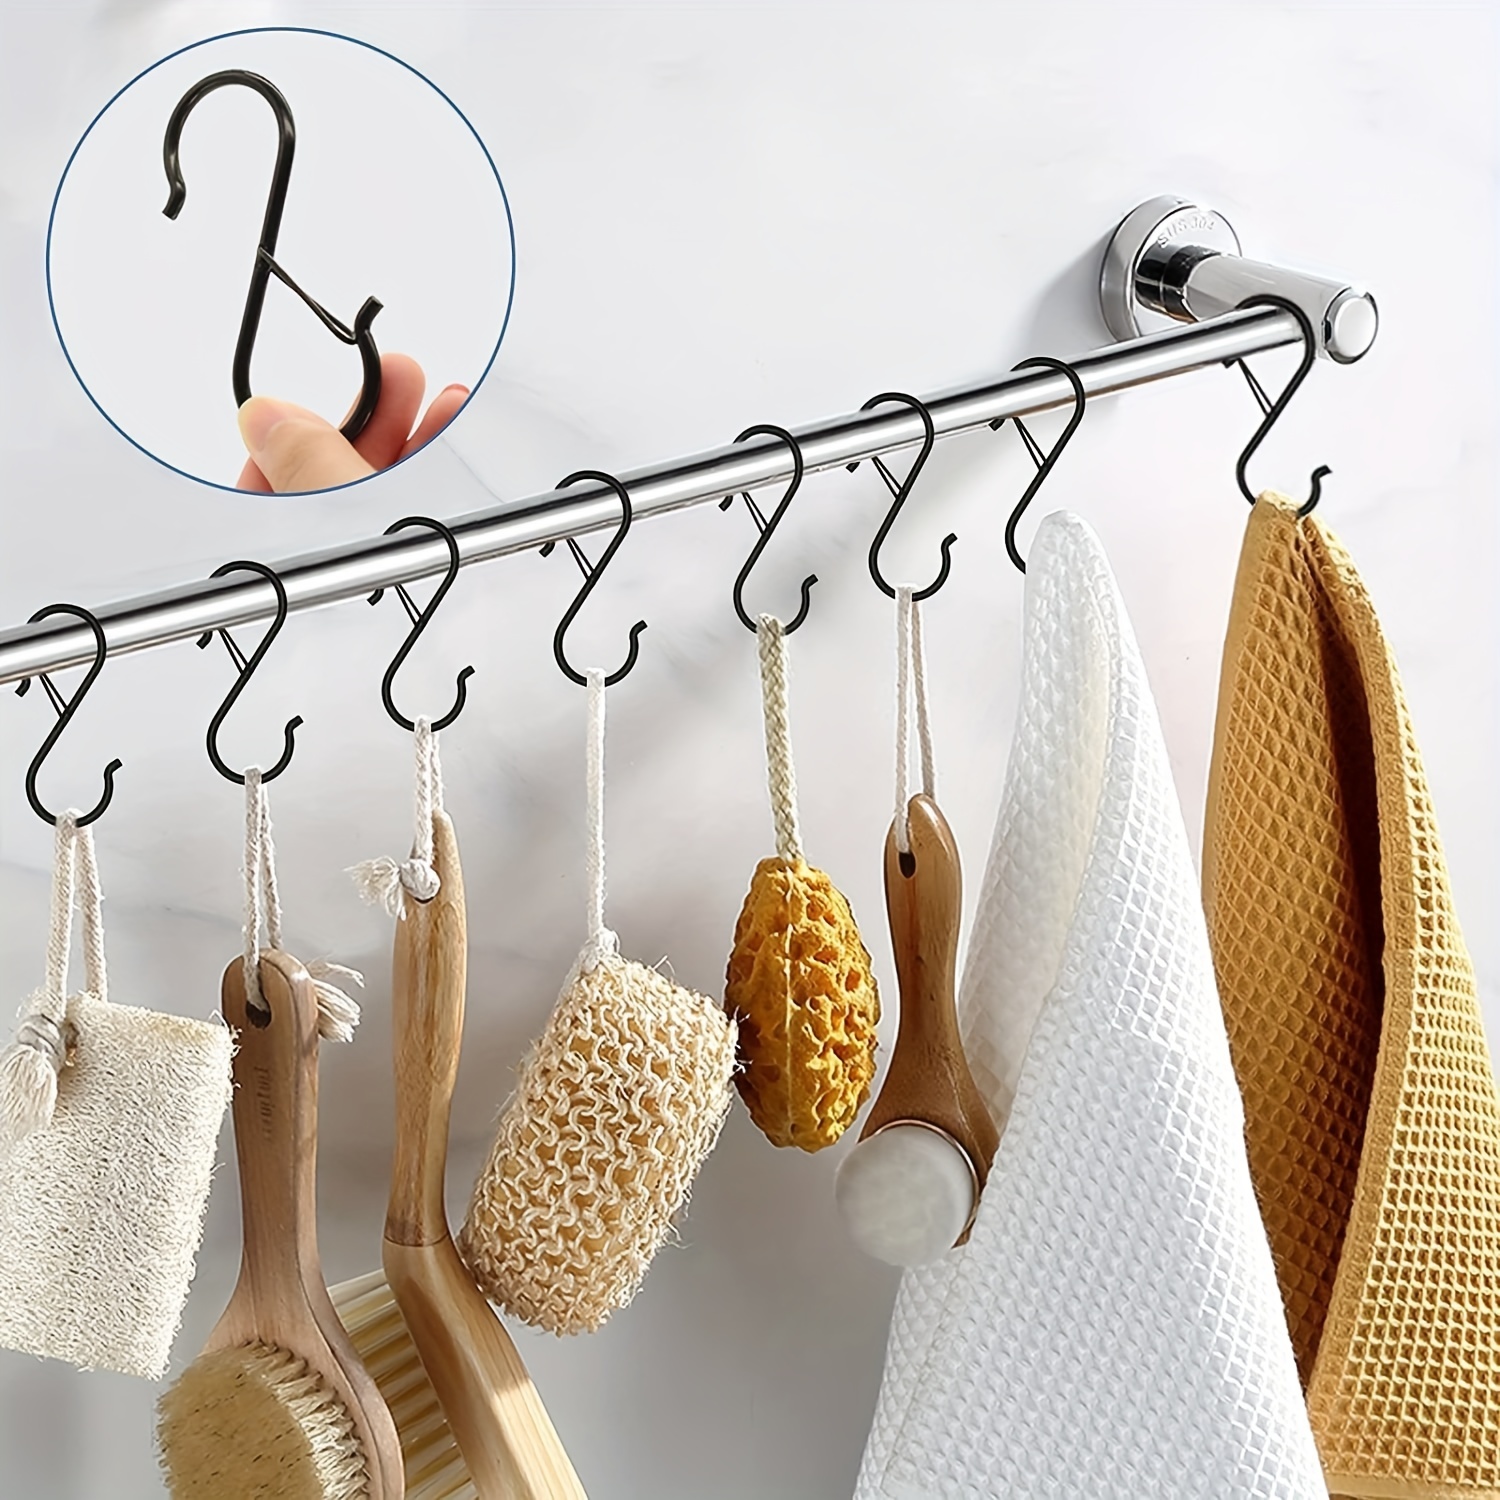 Heavy Duty S Hooks, Stainless Steel S Shaped Hooks for Hanging Kitchenware  Pan Pots Utensils Closet Clothes Bags Towels Plants Kitchen Hooks Hanger, 3